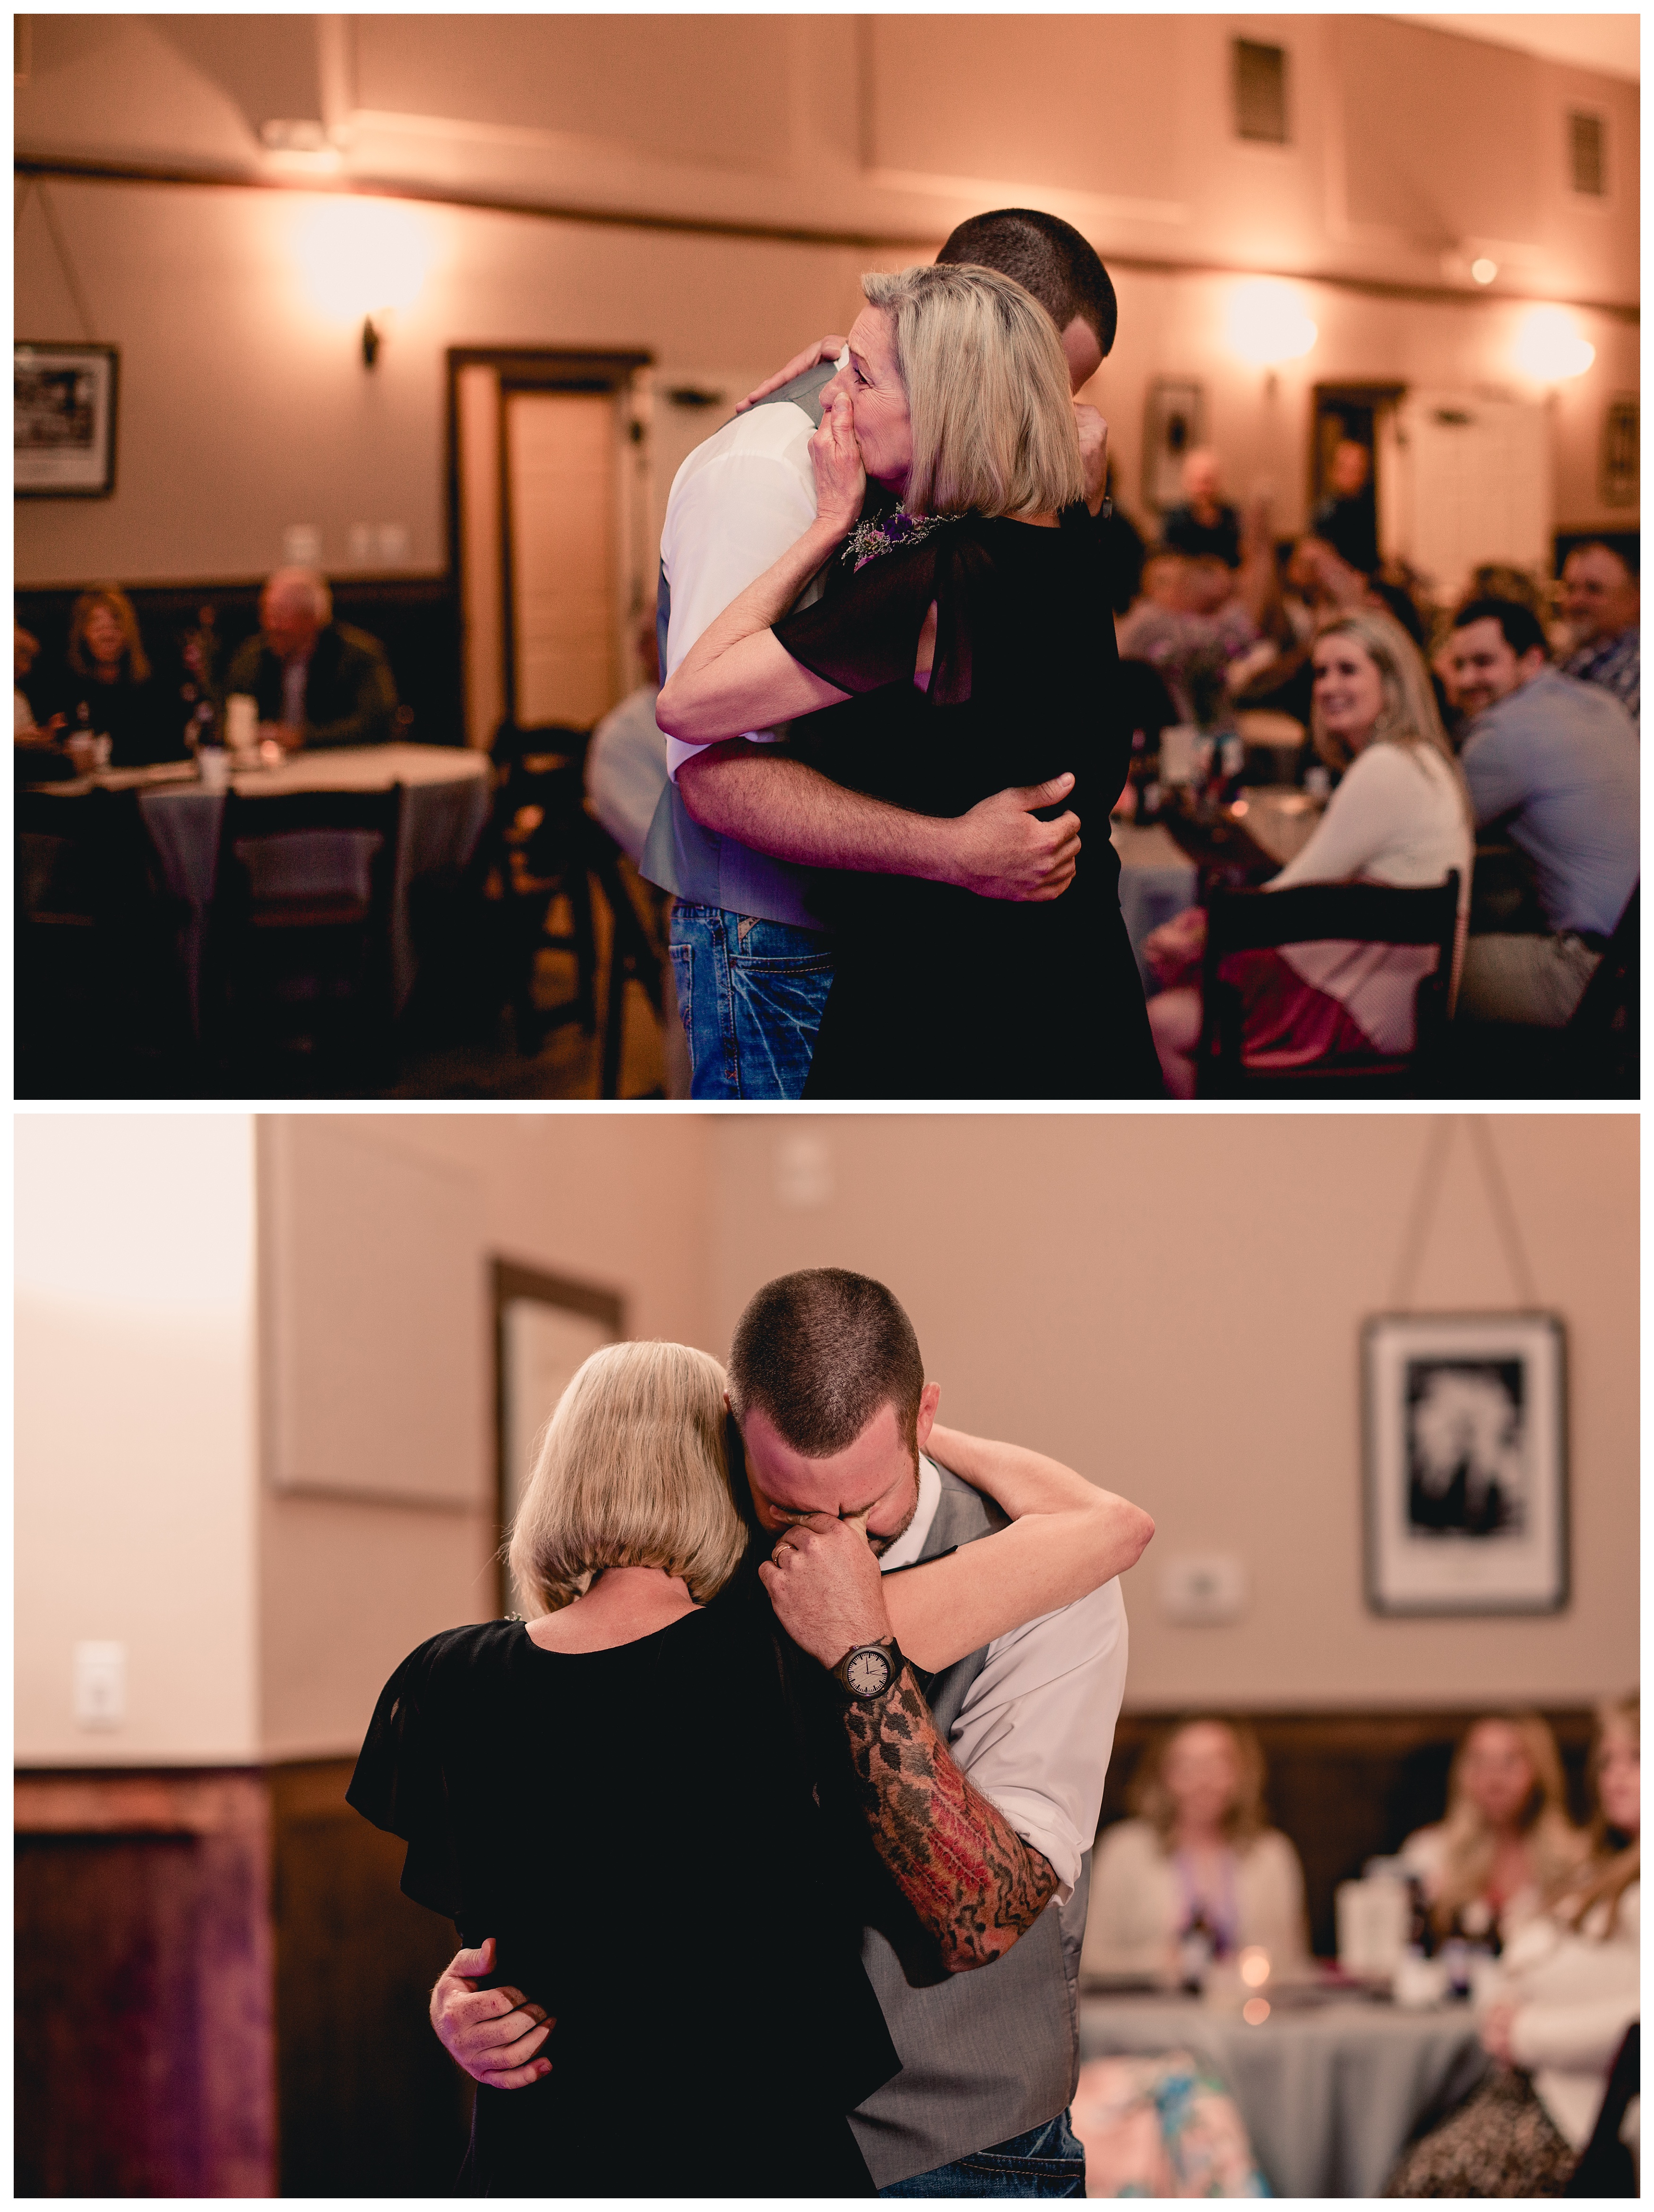 Emotional groom and mother of the groom first dance to childhood song in Tallahassee, FL. Shelly Williams Photography